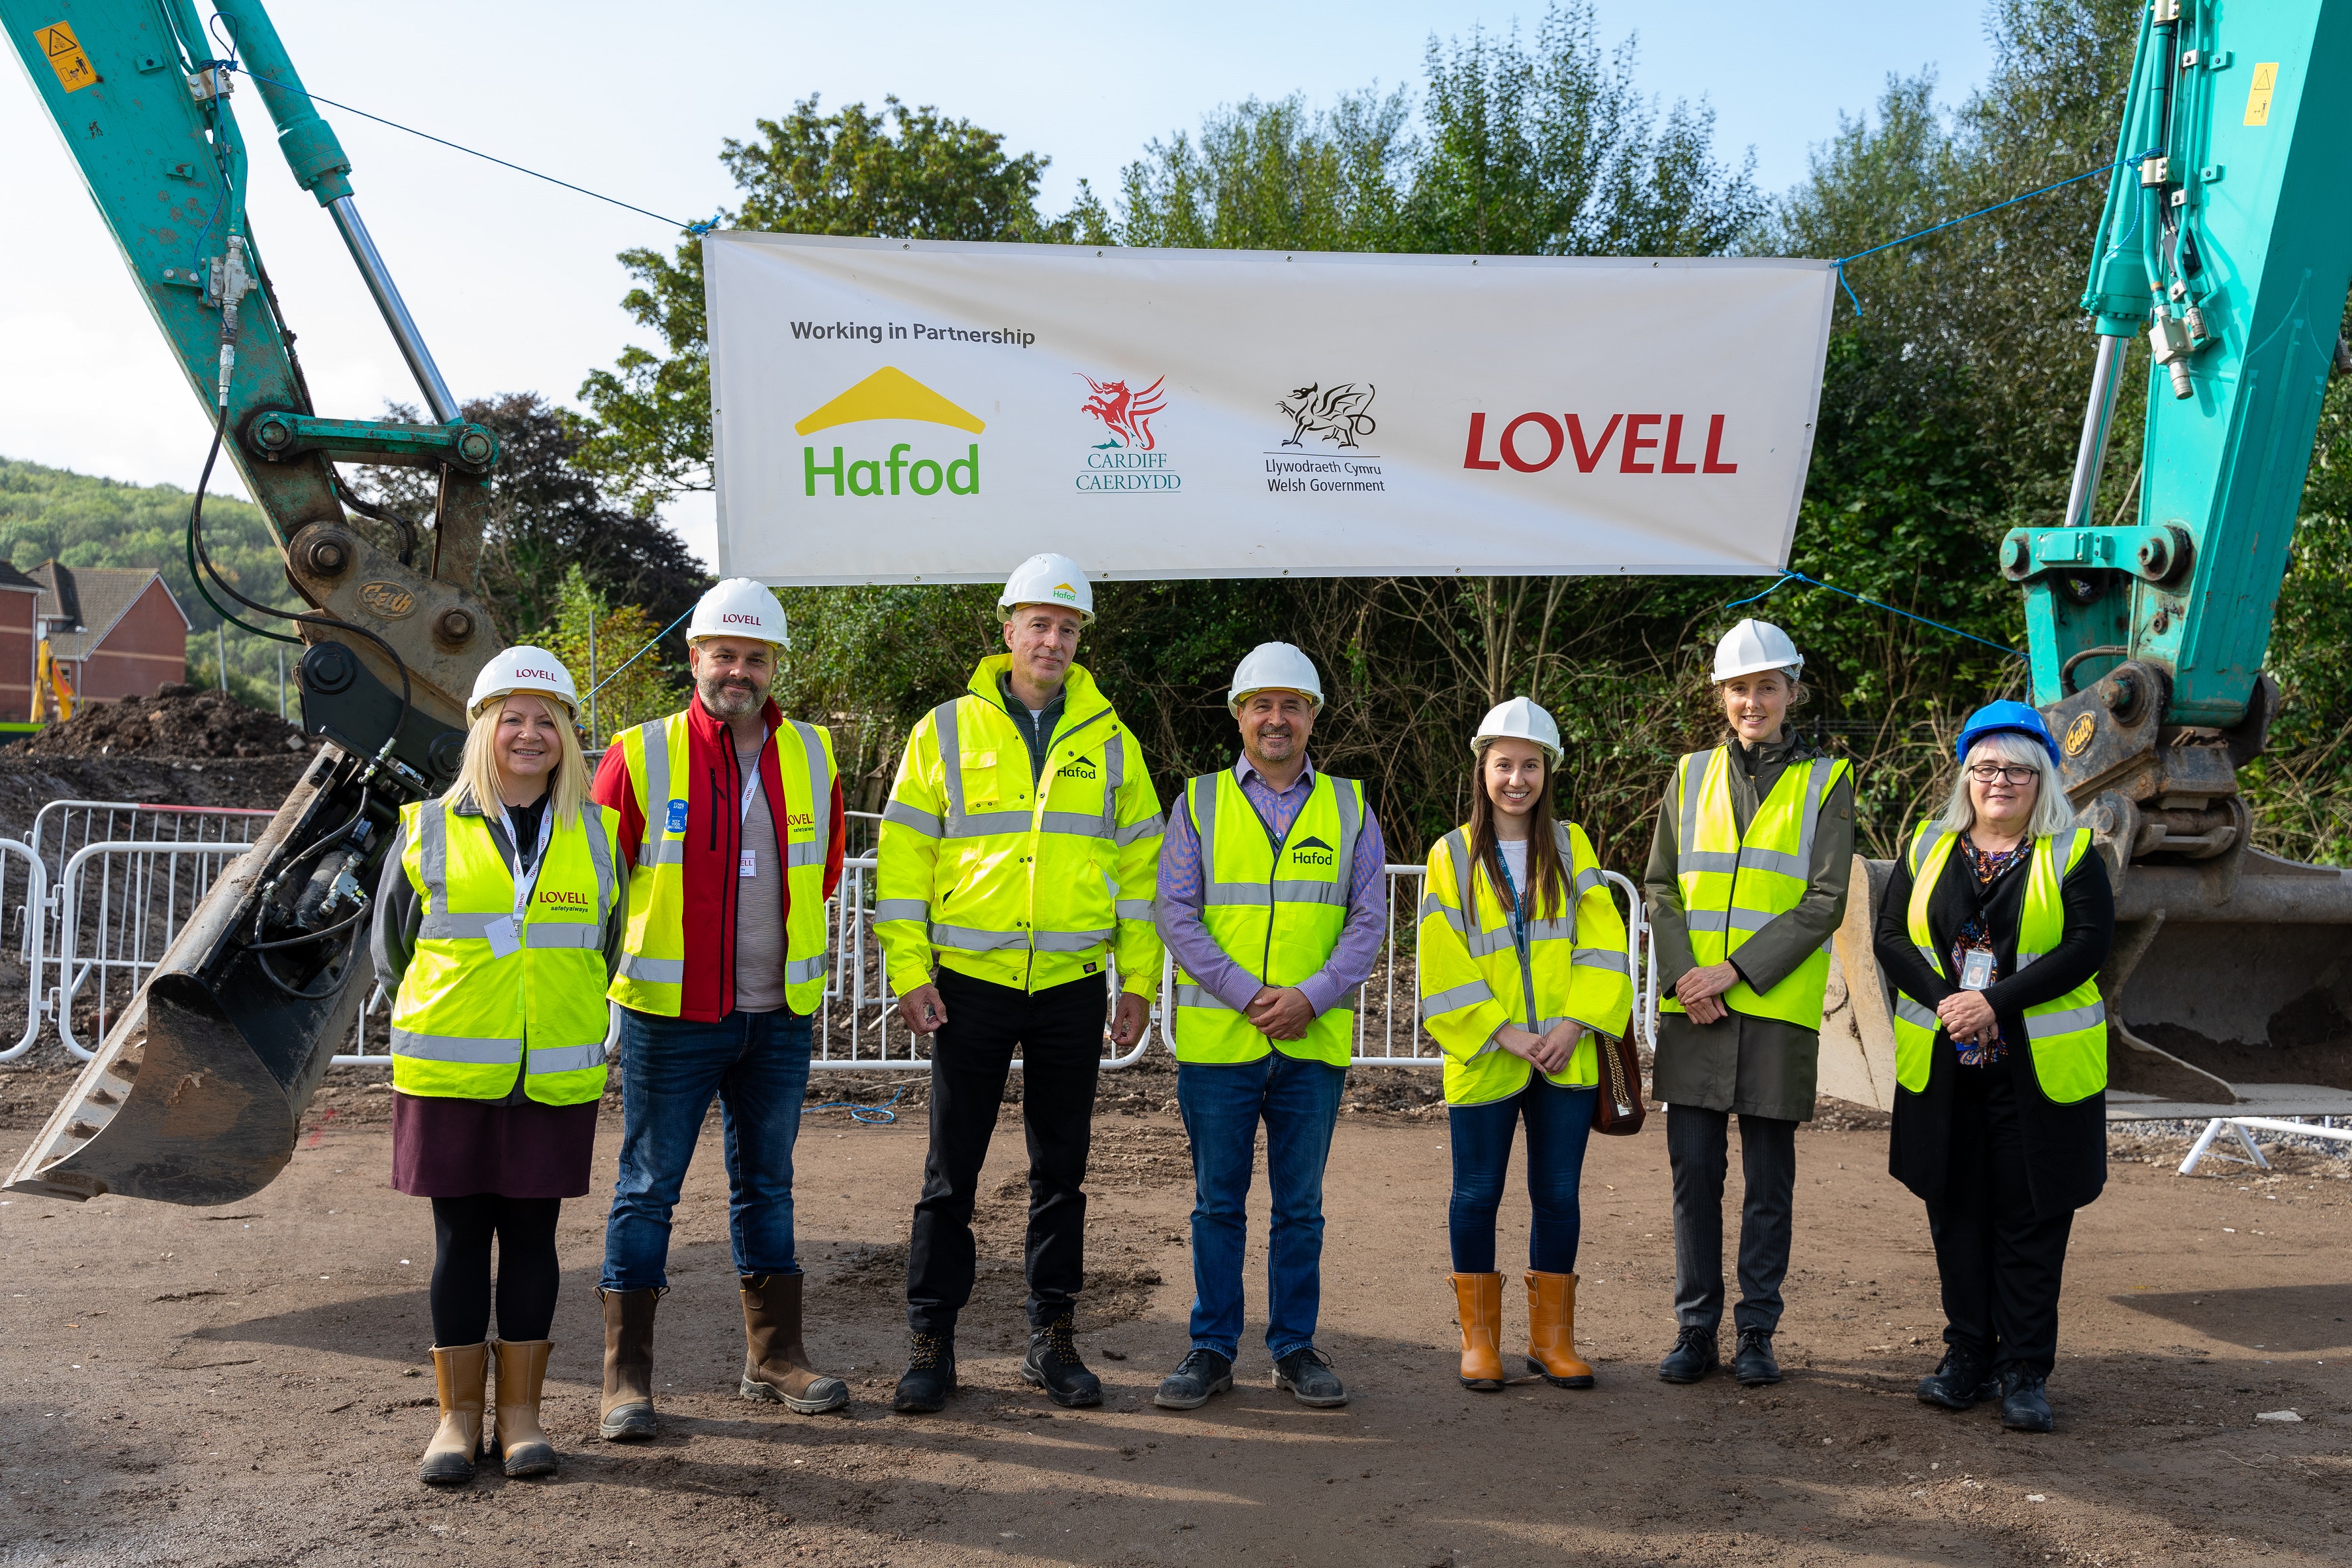 Representatives from Lovell and Hafod at the Lansdowne site groundbreaking